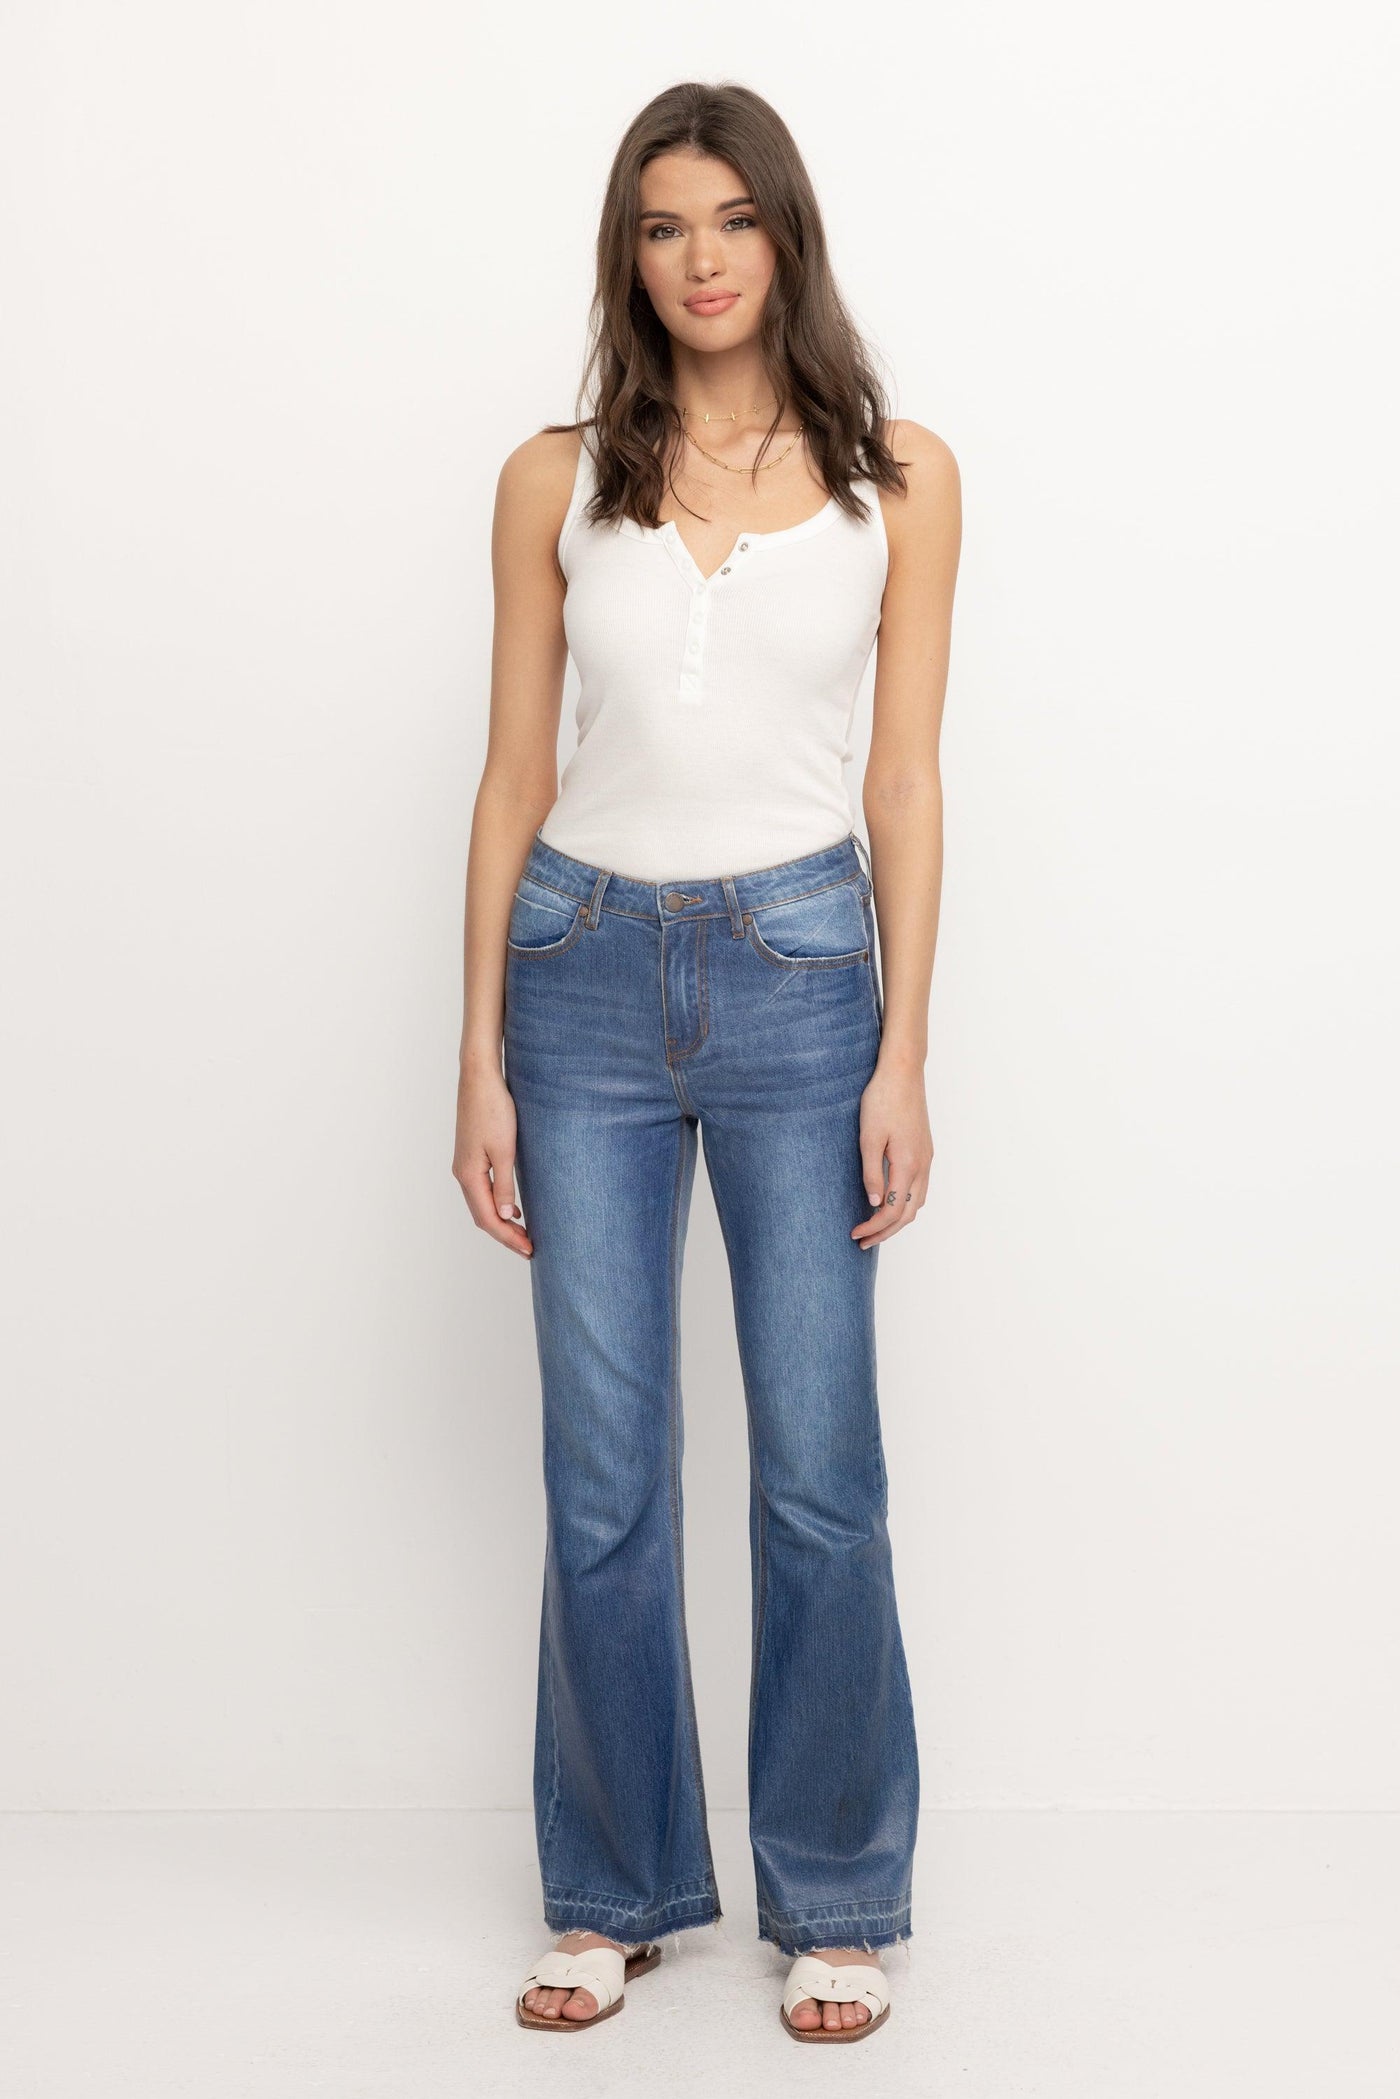 Coated Amber - High Rise Flare Jean - PTCL